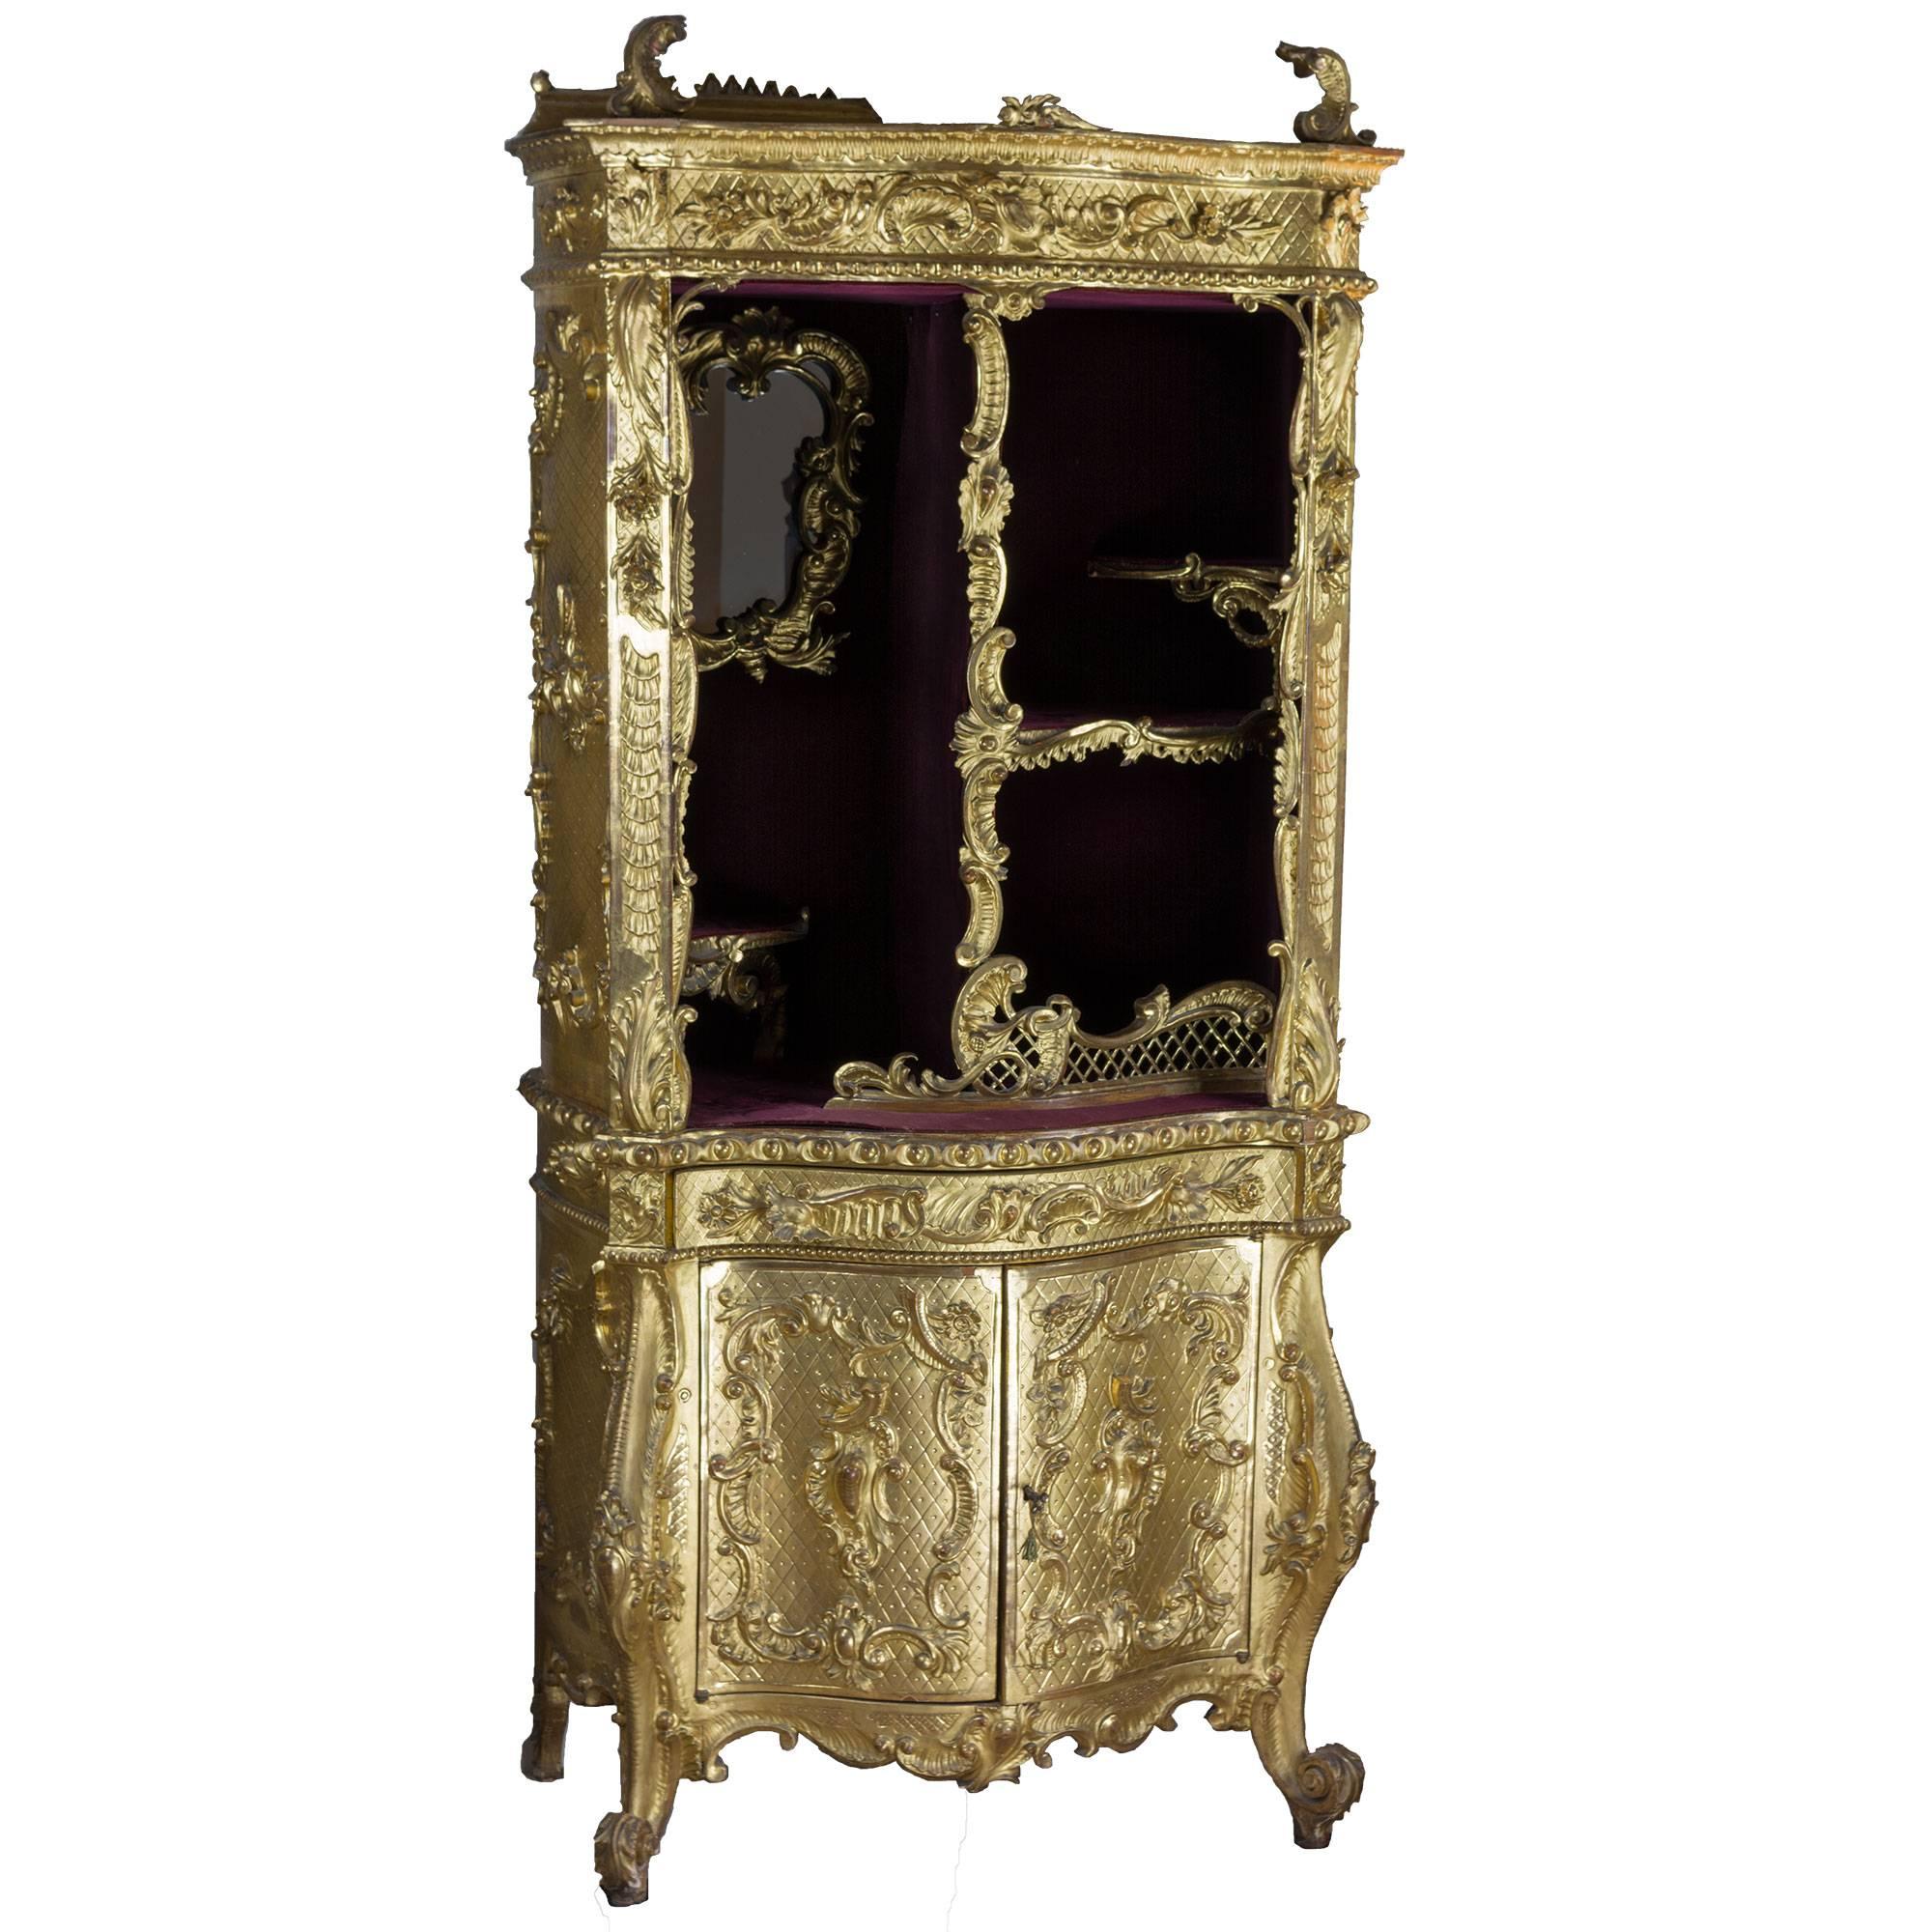 Splendid Display Cabinet in the Rococo Style